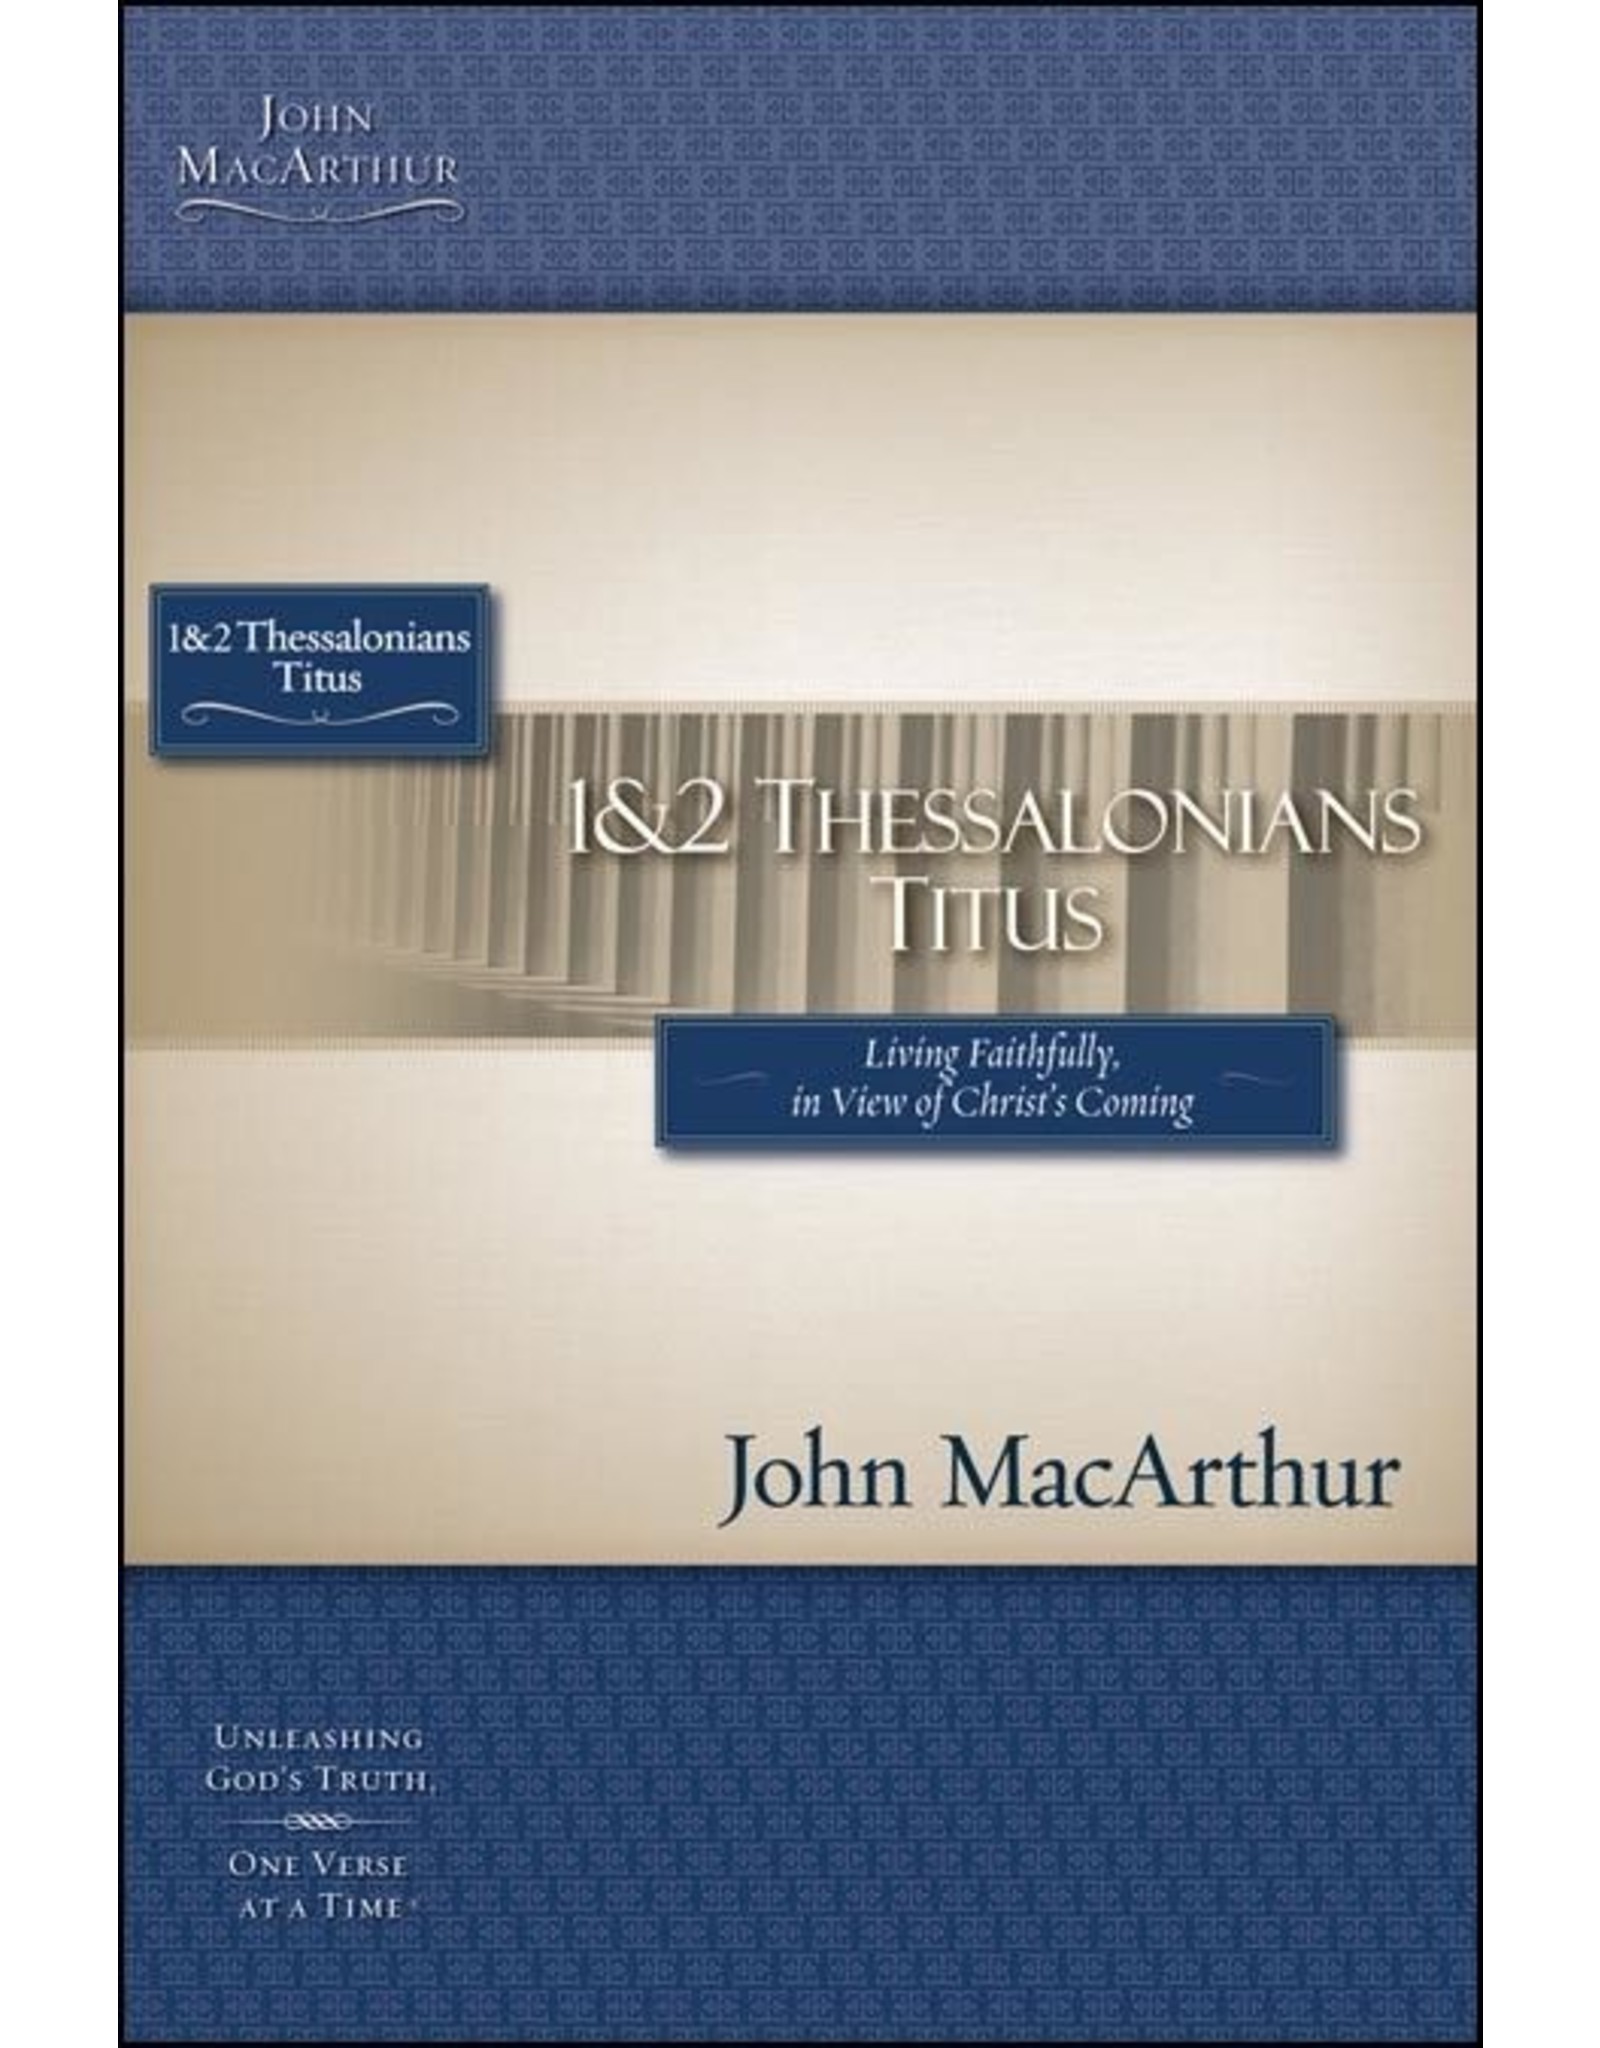 Harper Collins / Thomas Nelson / Zondervan (1st Ed.) MacArthur Bible Study (MBS): 1 & 2 Thessalonians and Titus